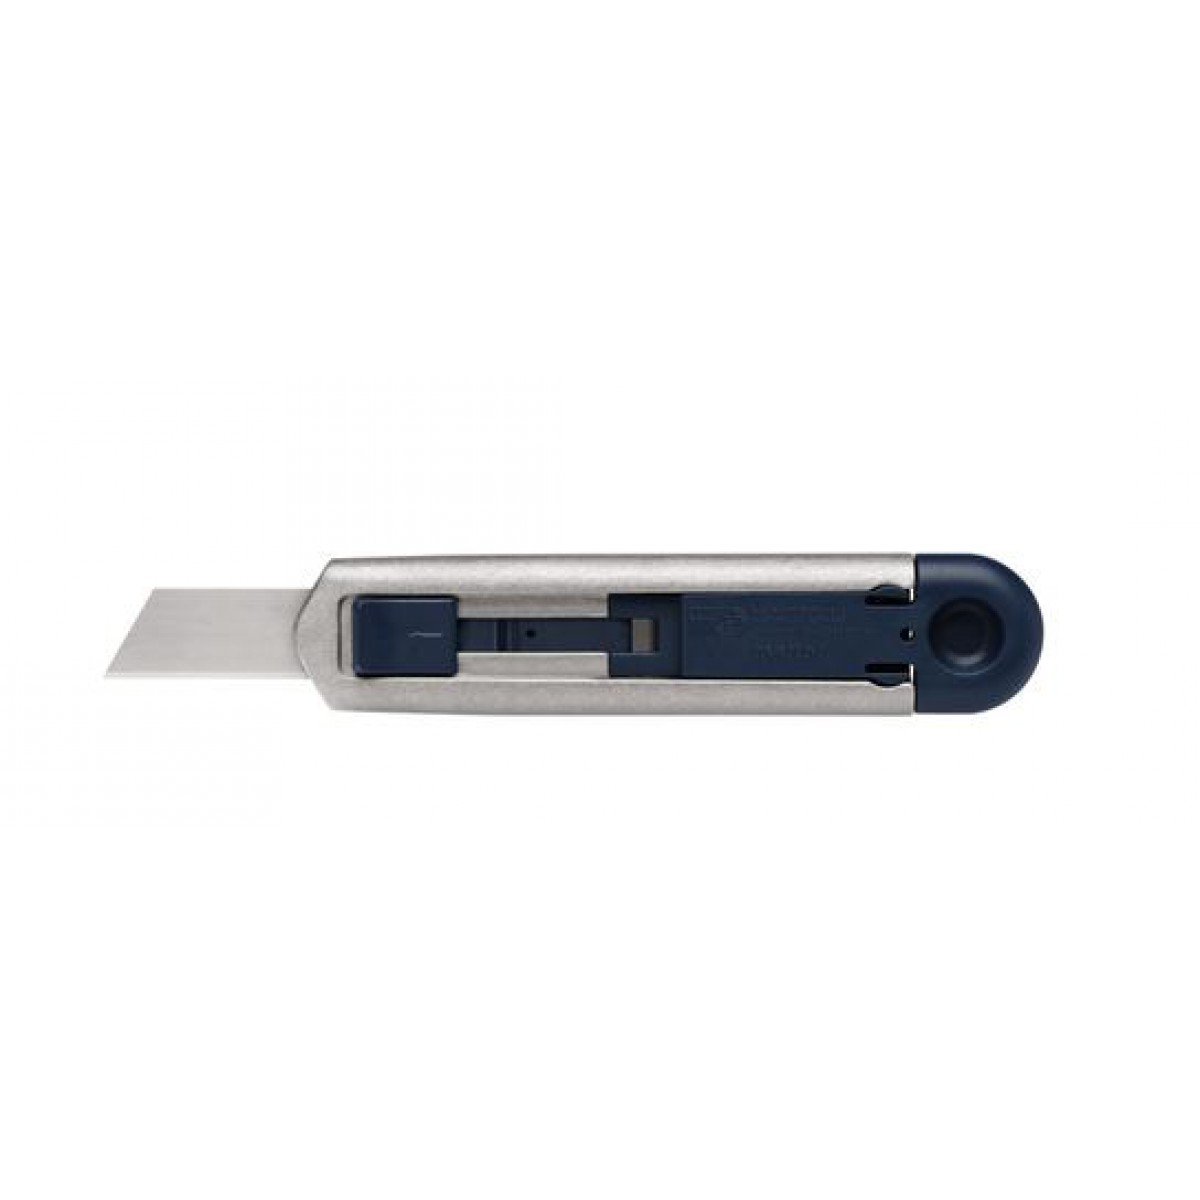 SECUNORM PROFI40 MDP Metal Detectable Safety Knife